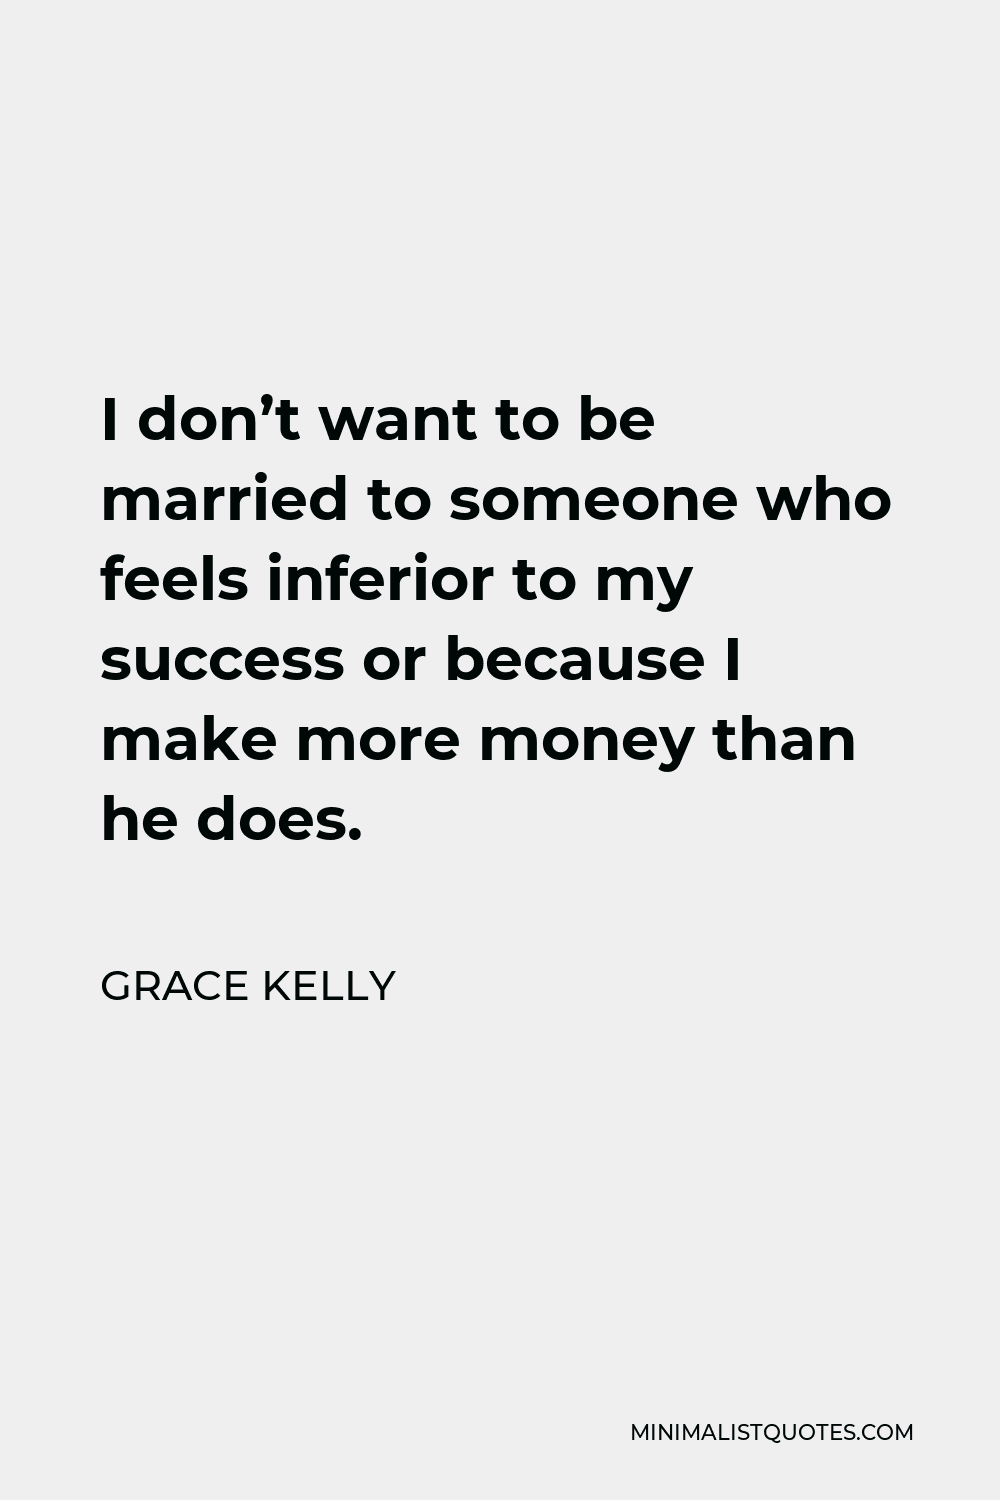 Grace Kelly Quote - I don’t want to be married to someone who feels inferior to my success or because I make more money than he does.